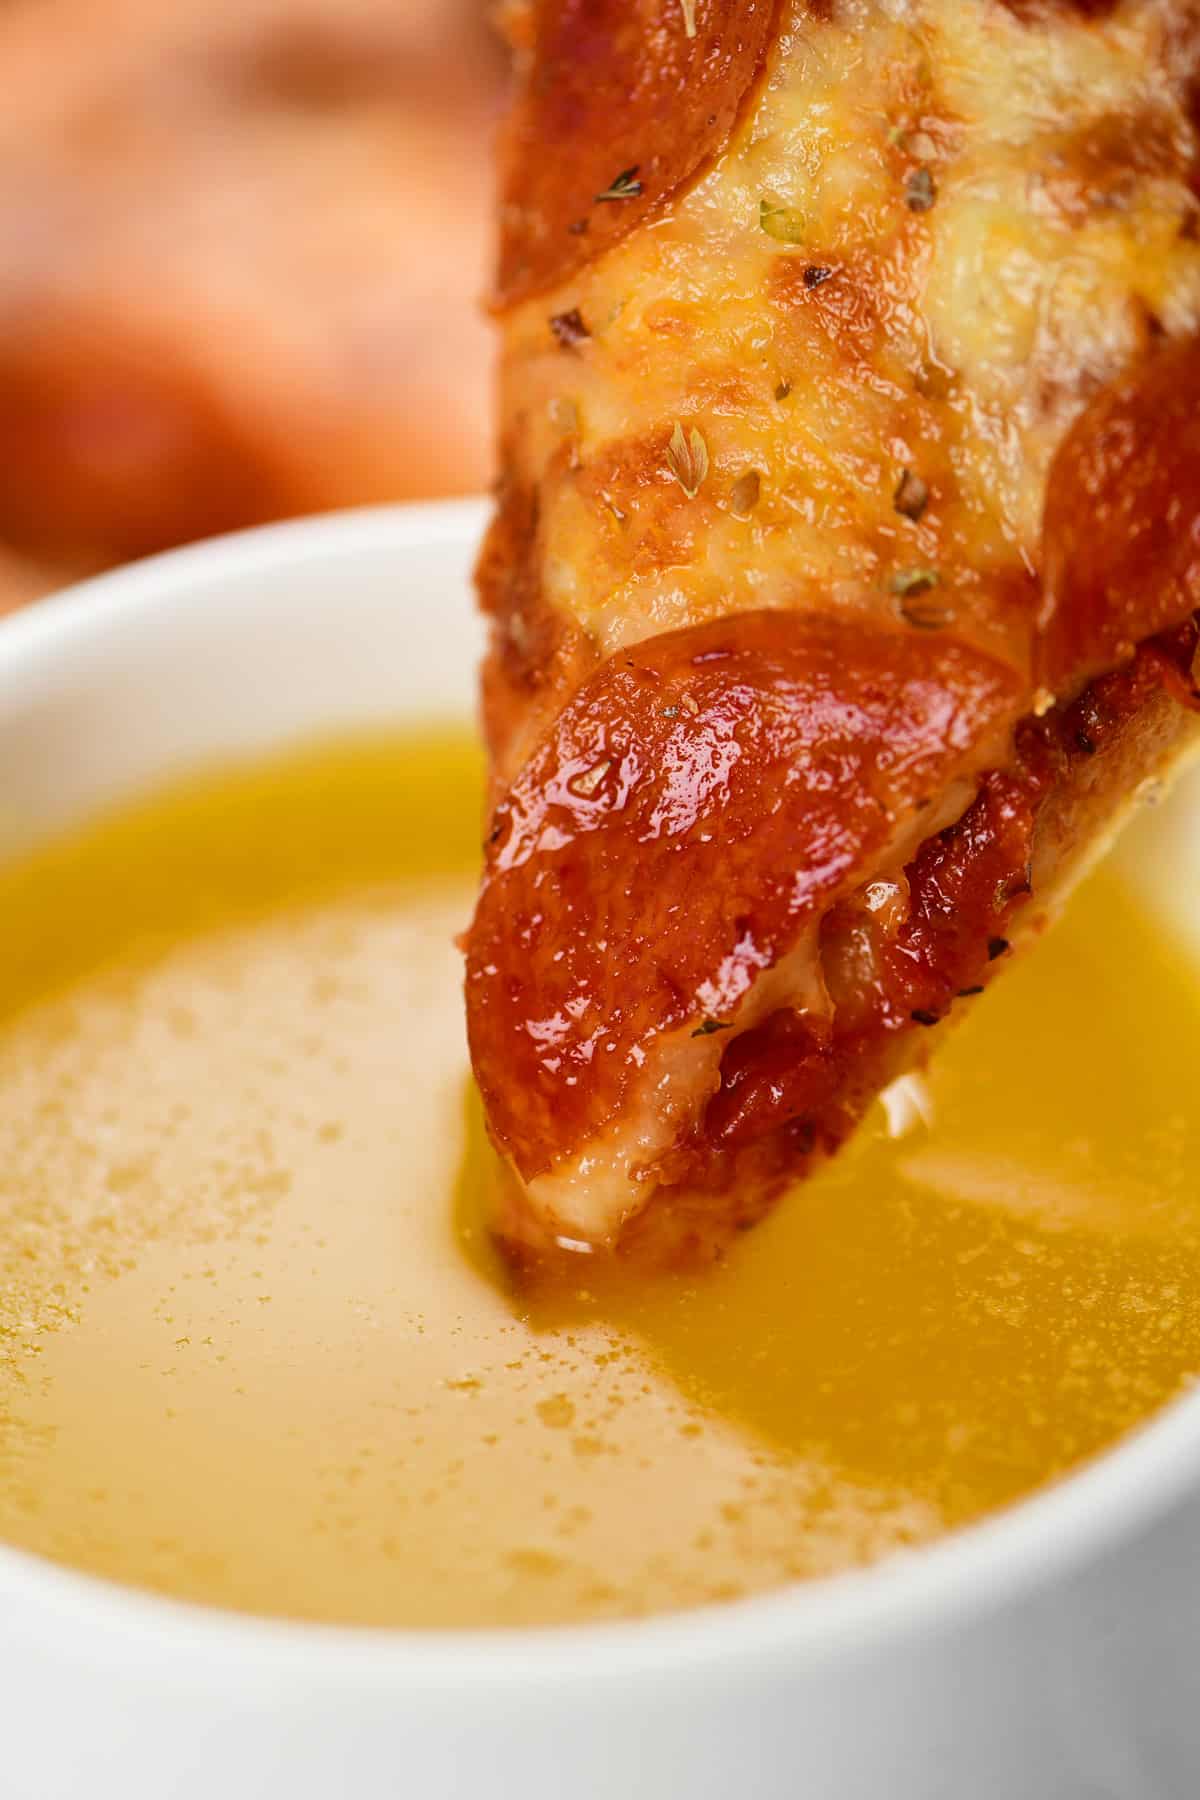 A slice of pizza dipped into garlic butter.